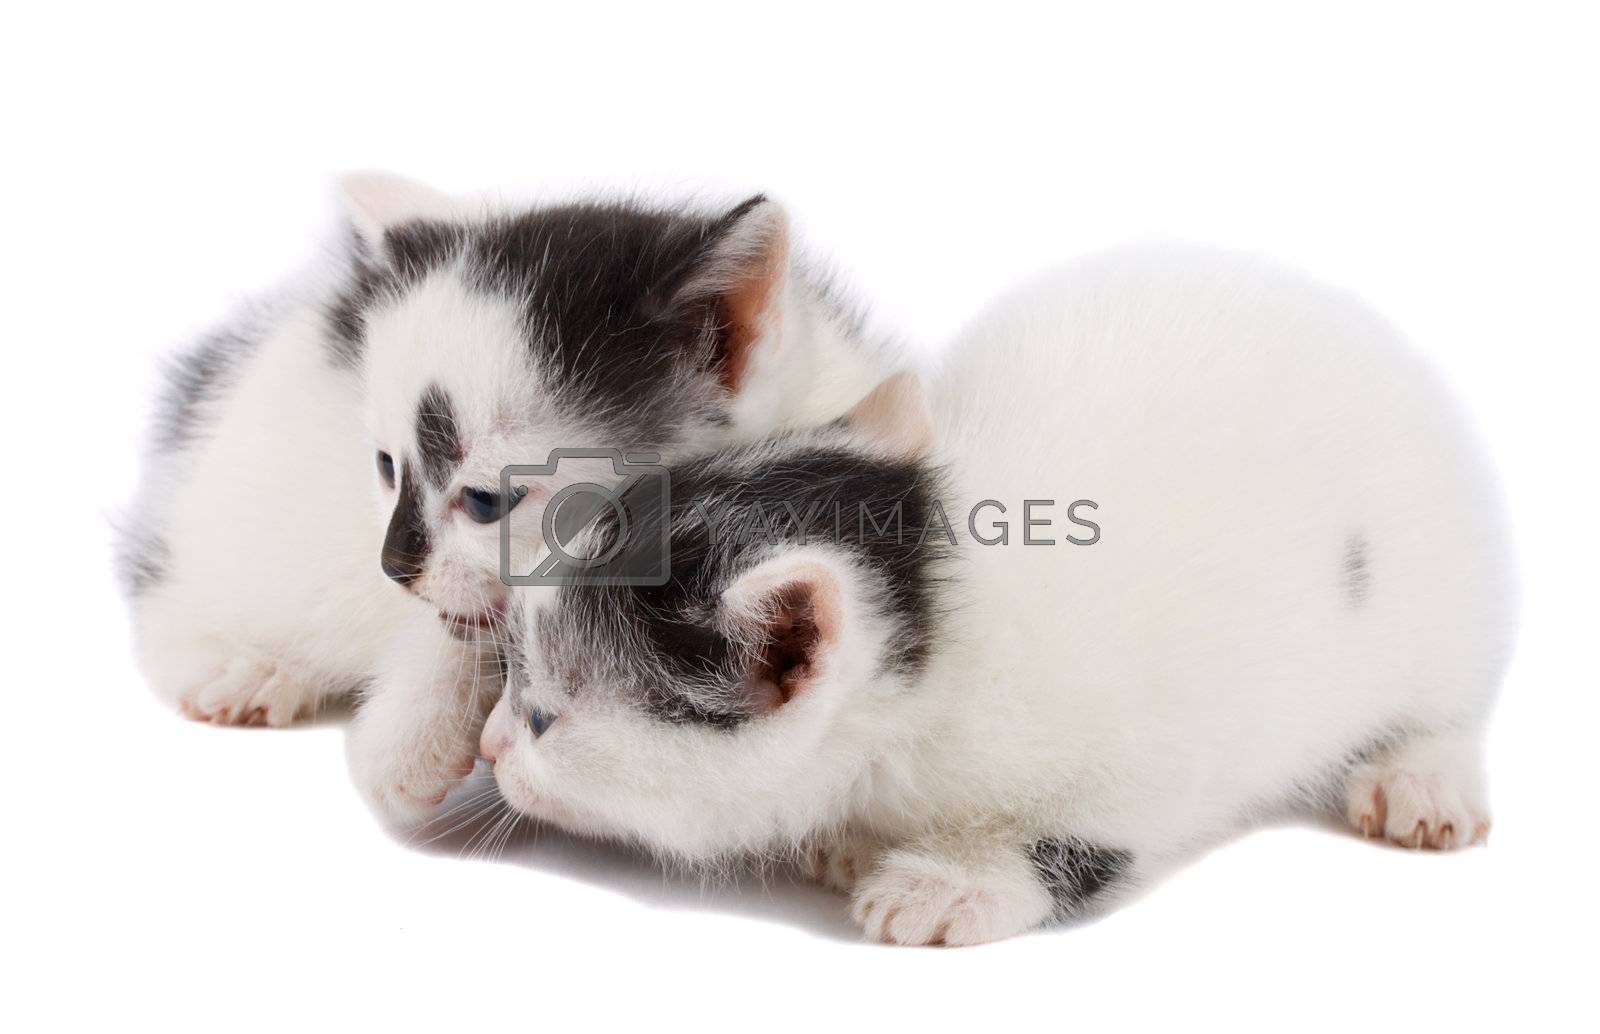 Royalty free image of two kittens by Alekcey